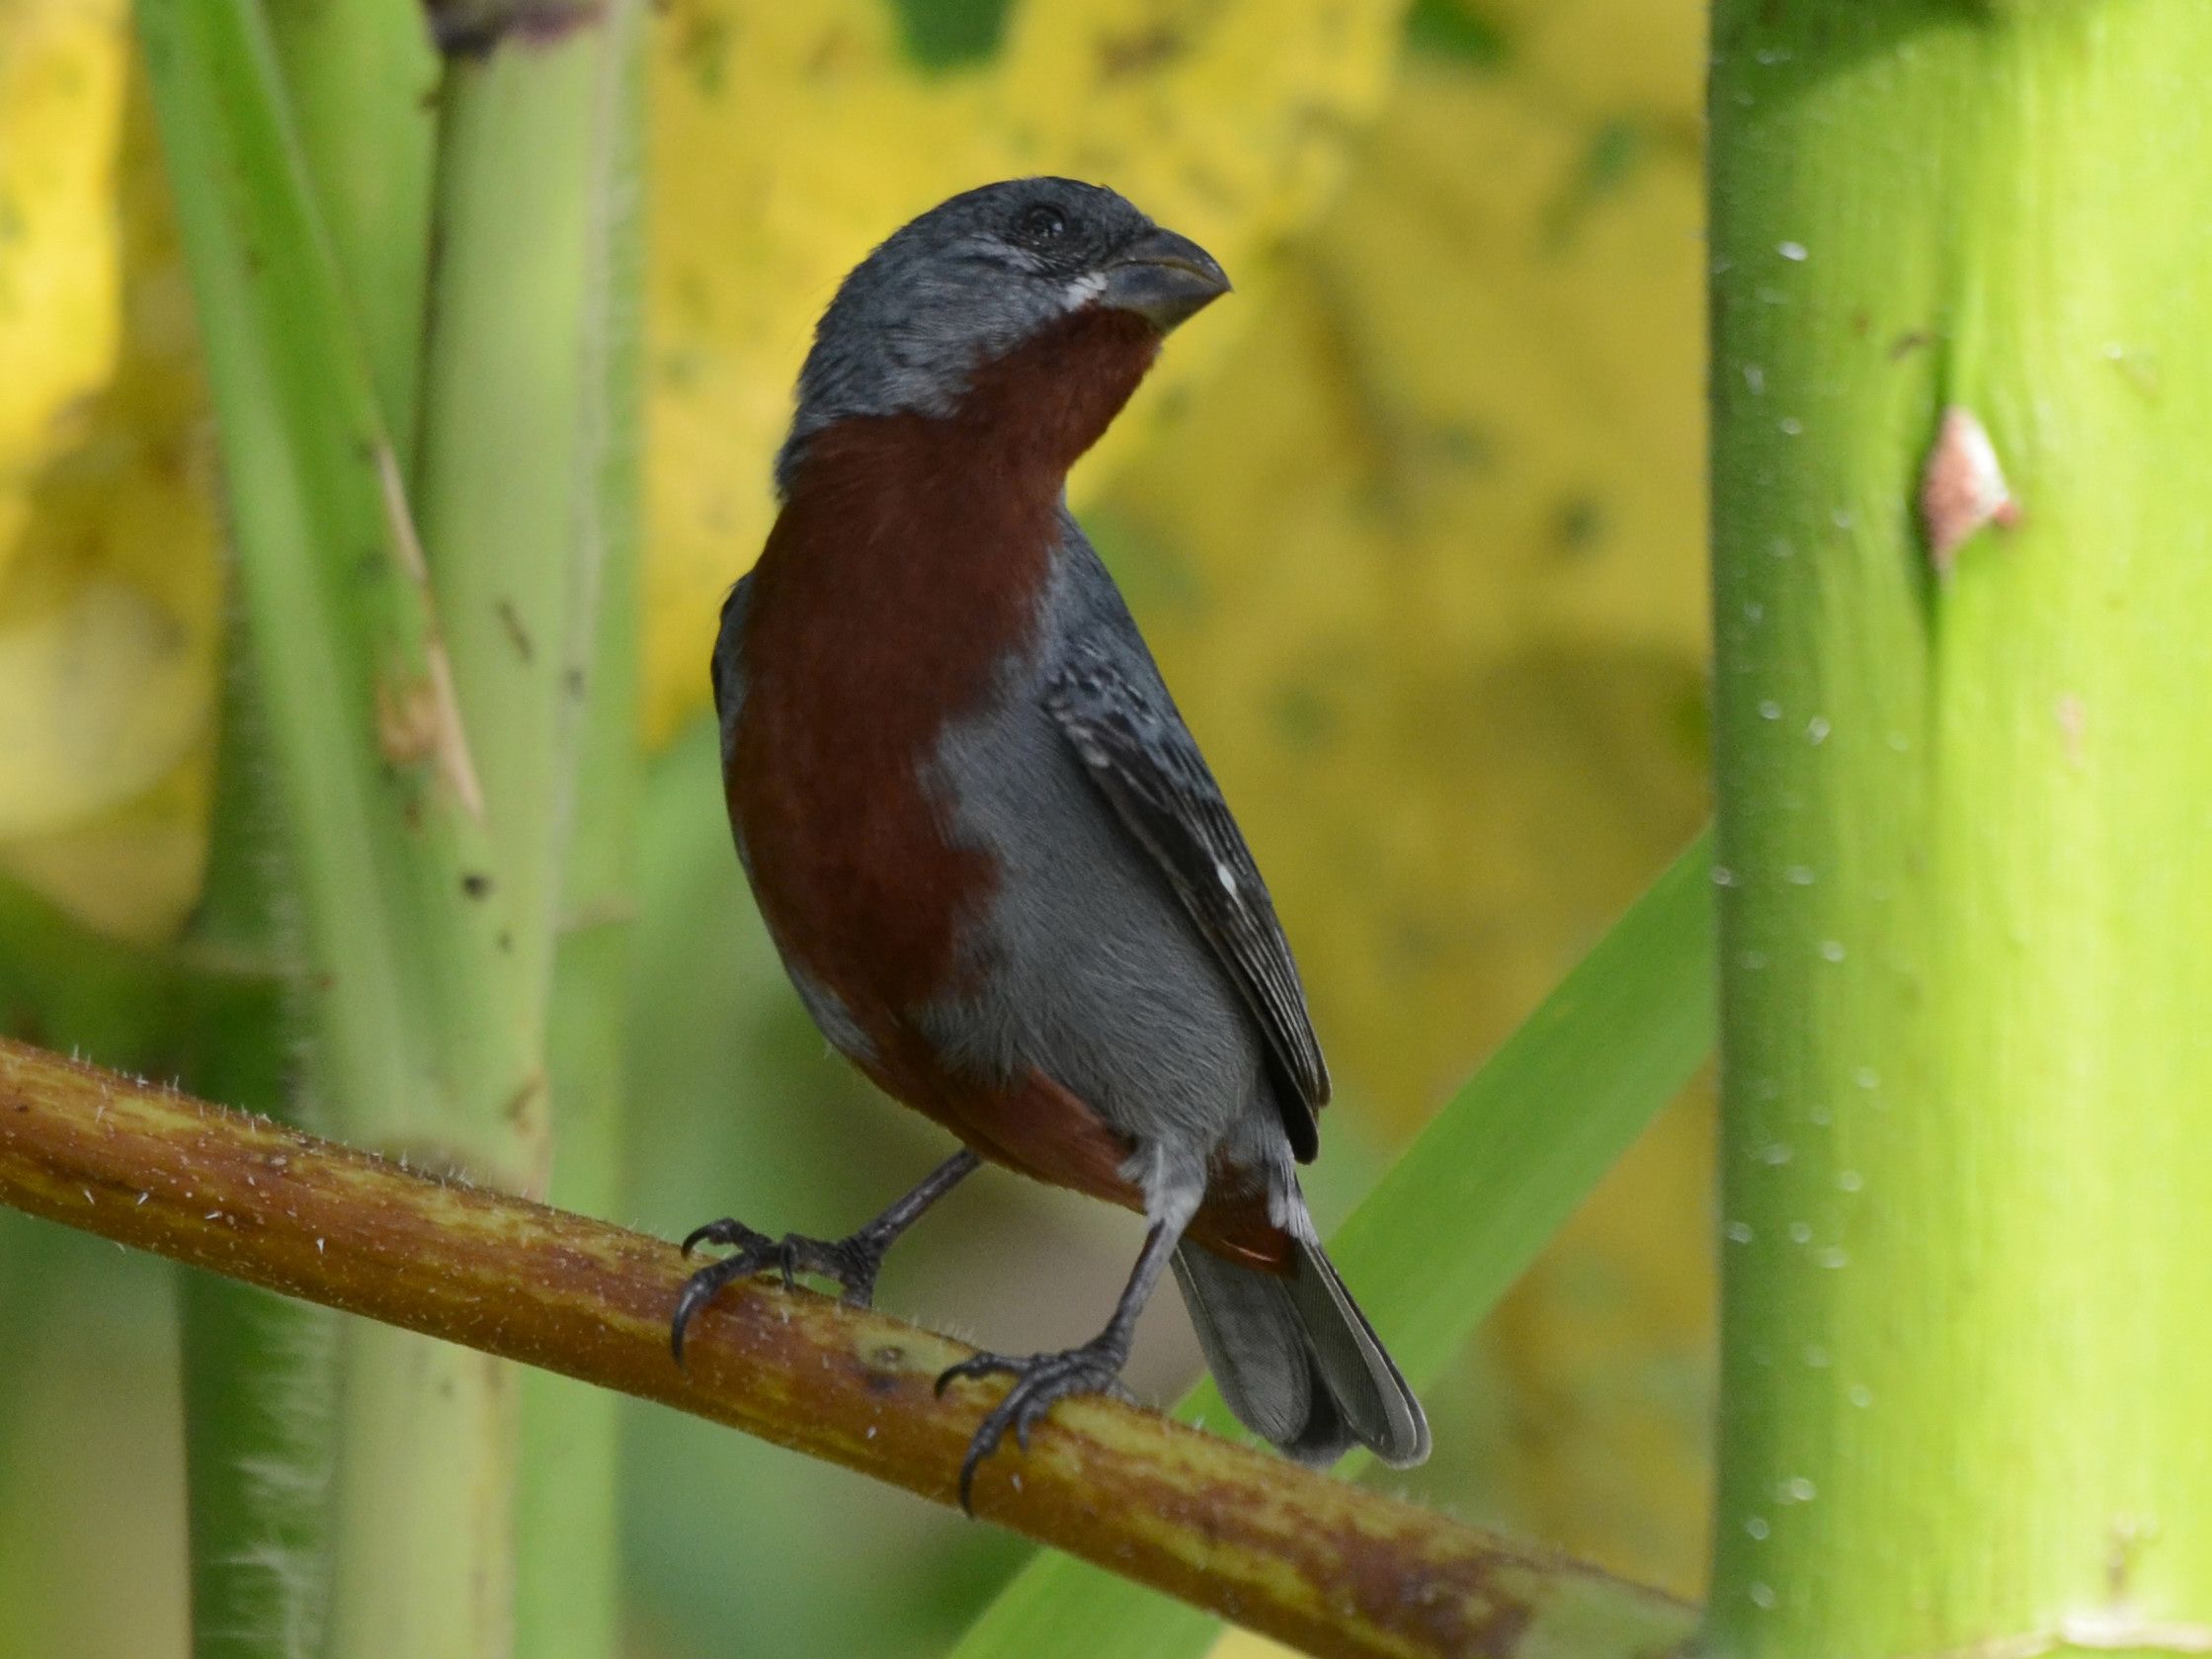 Click picture to see more Chestnut-bellied Seedeaters.